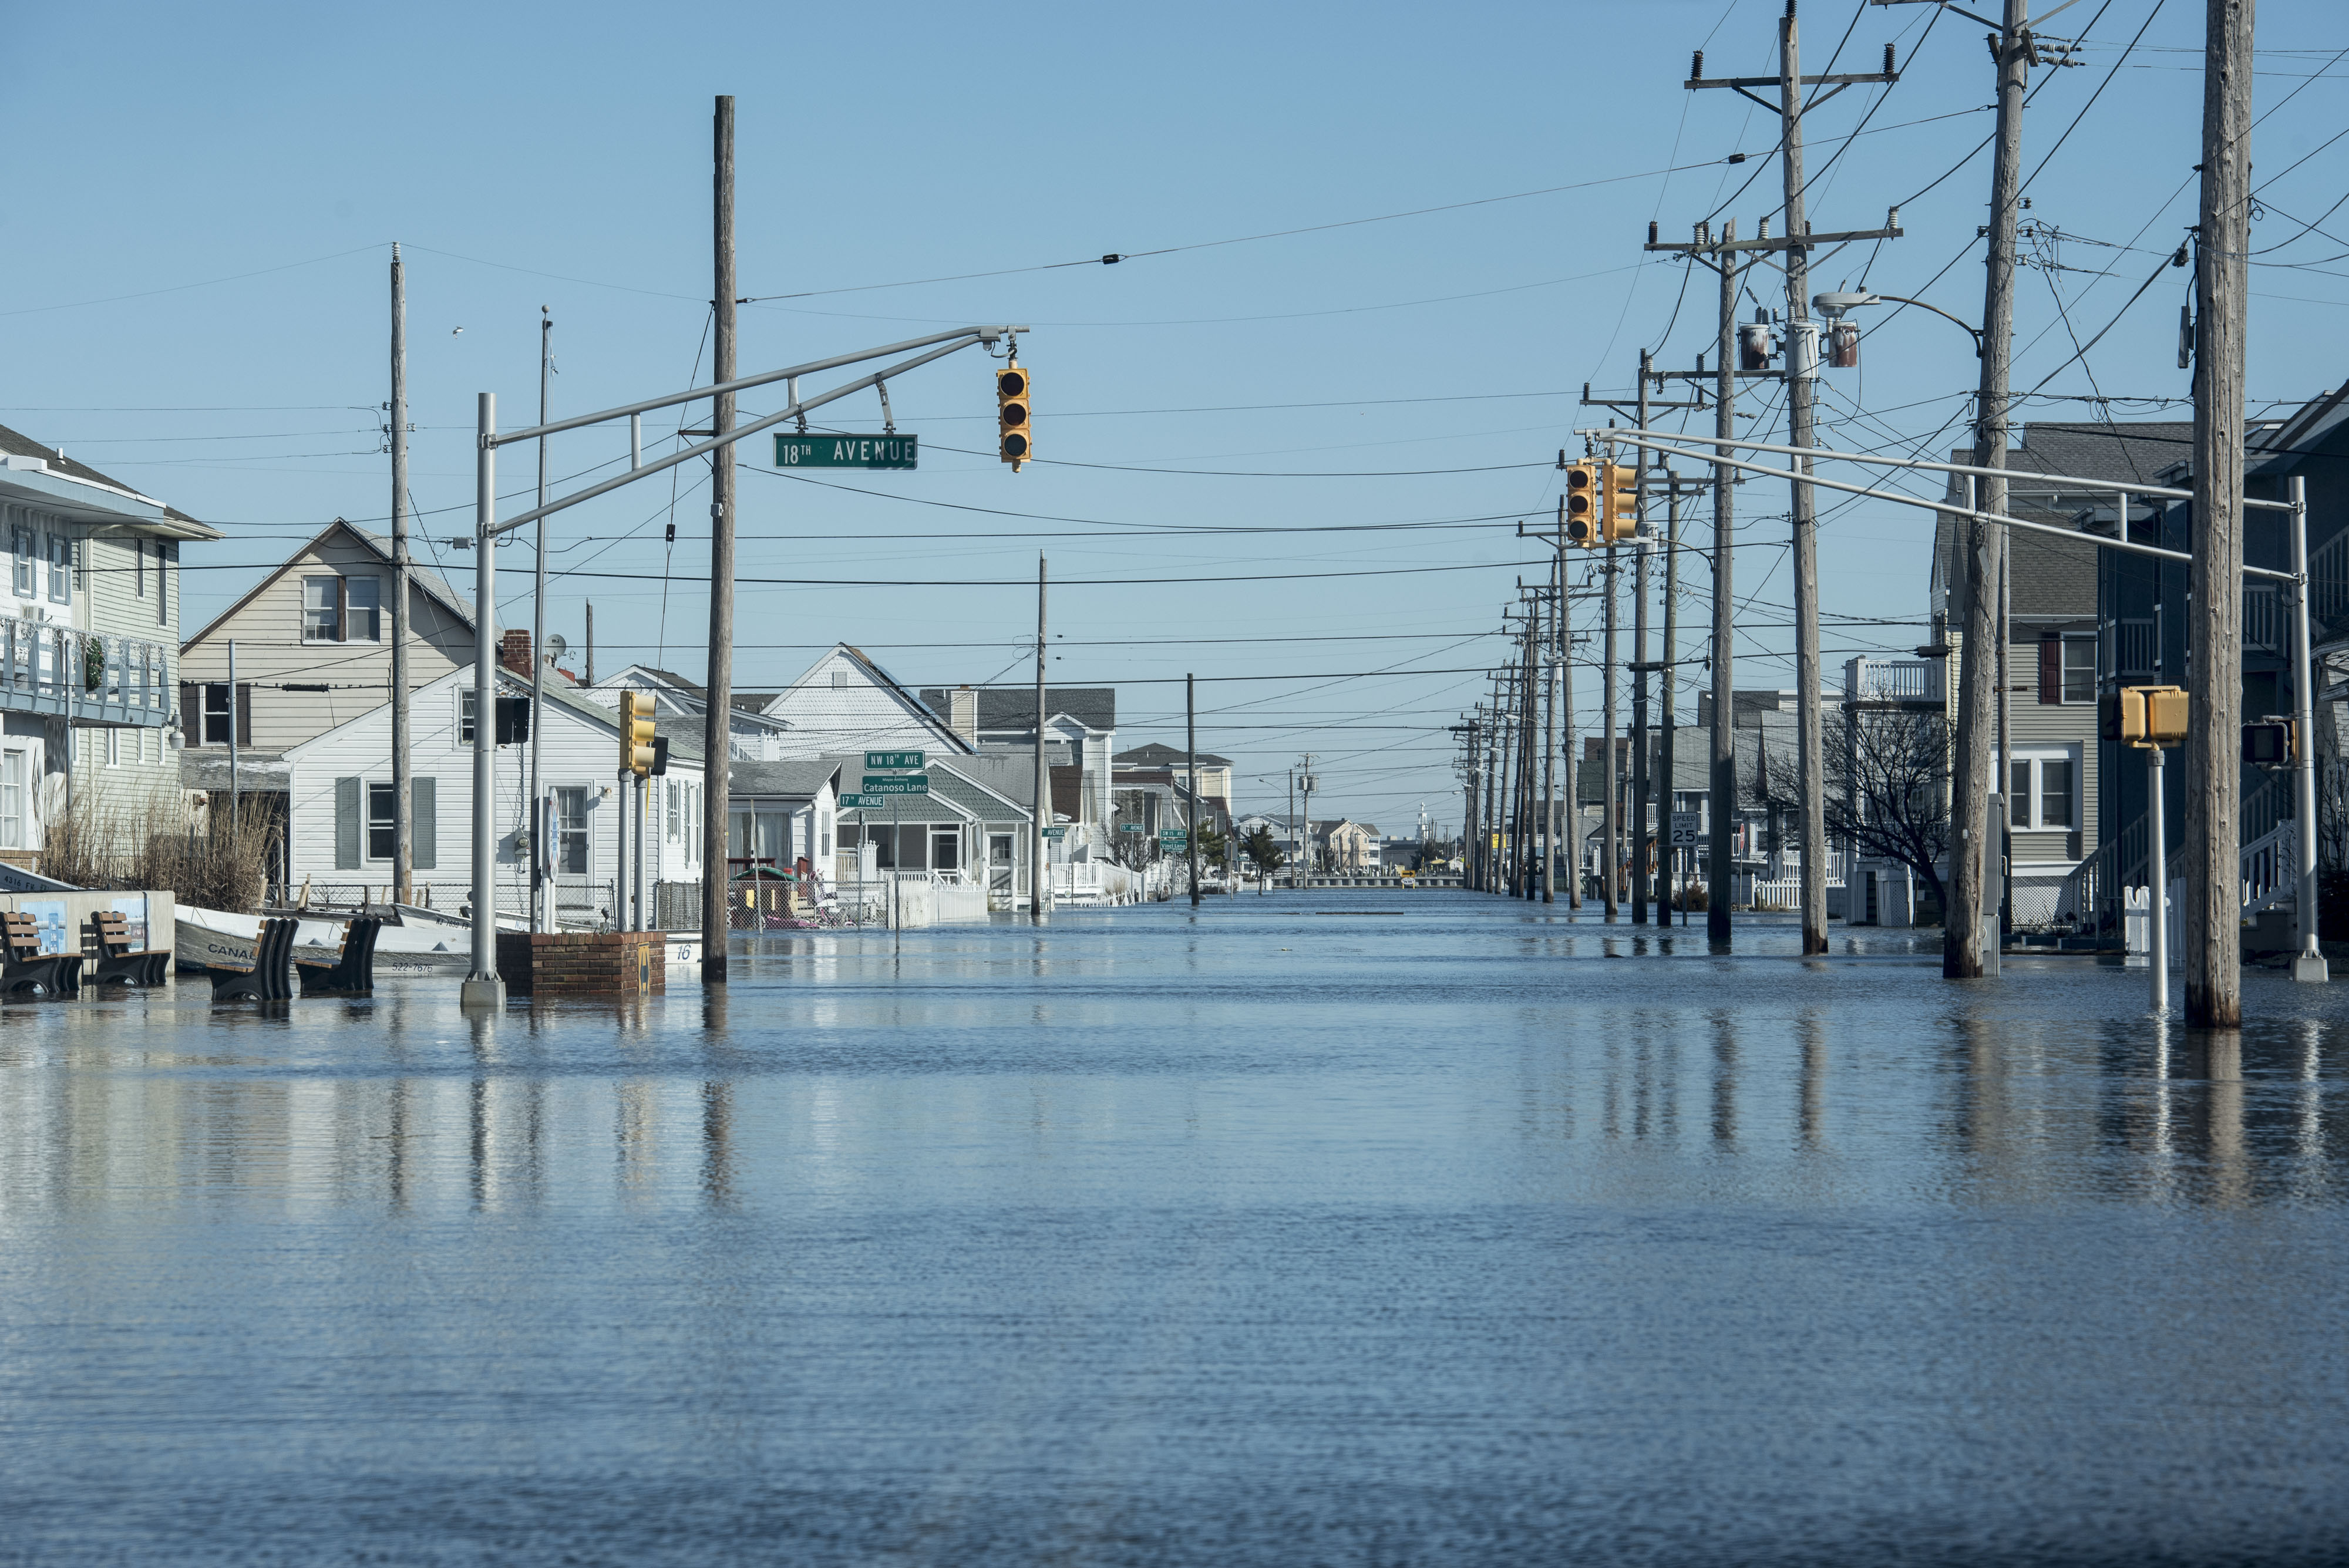 Floodwaters ravage Jersey shore towns after record storm CBS News